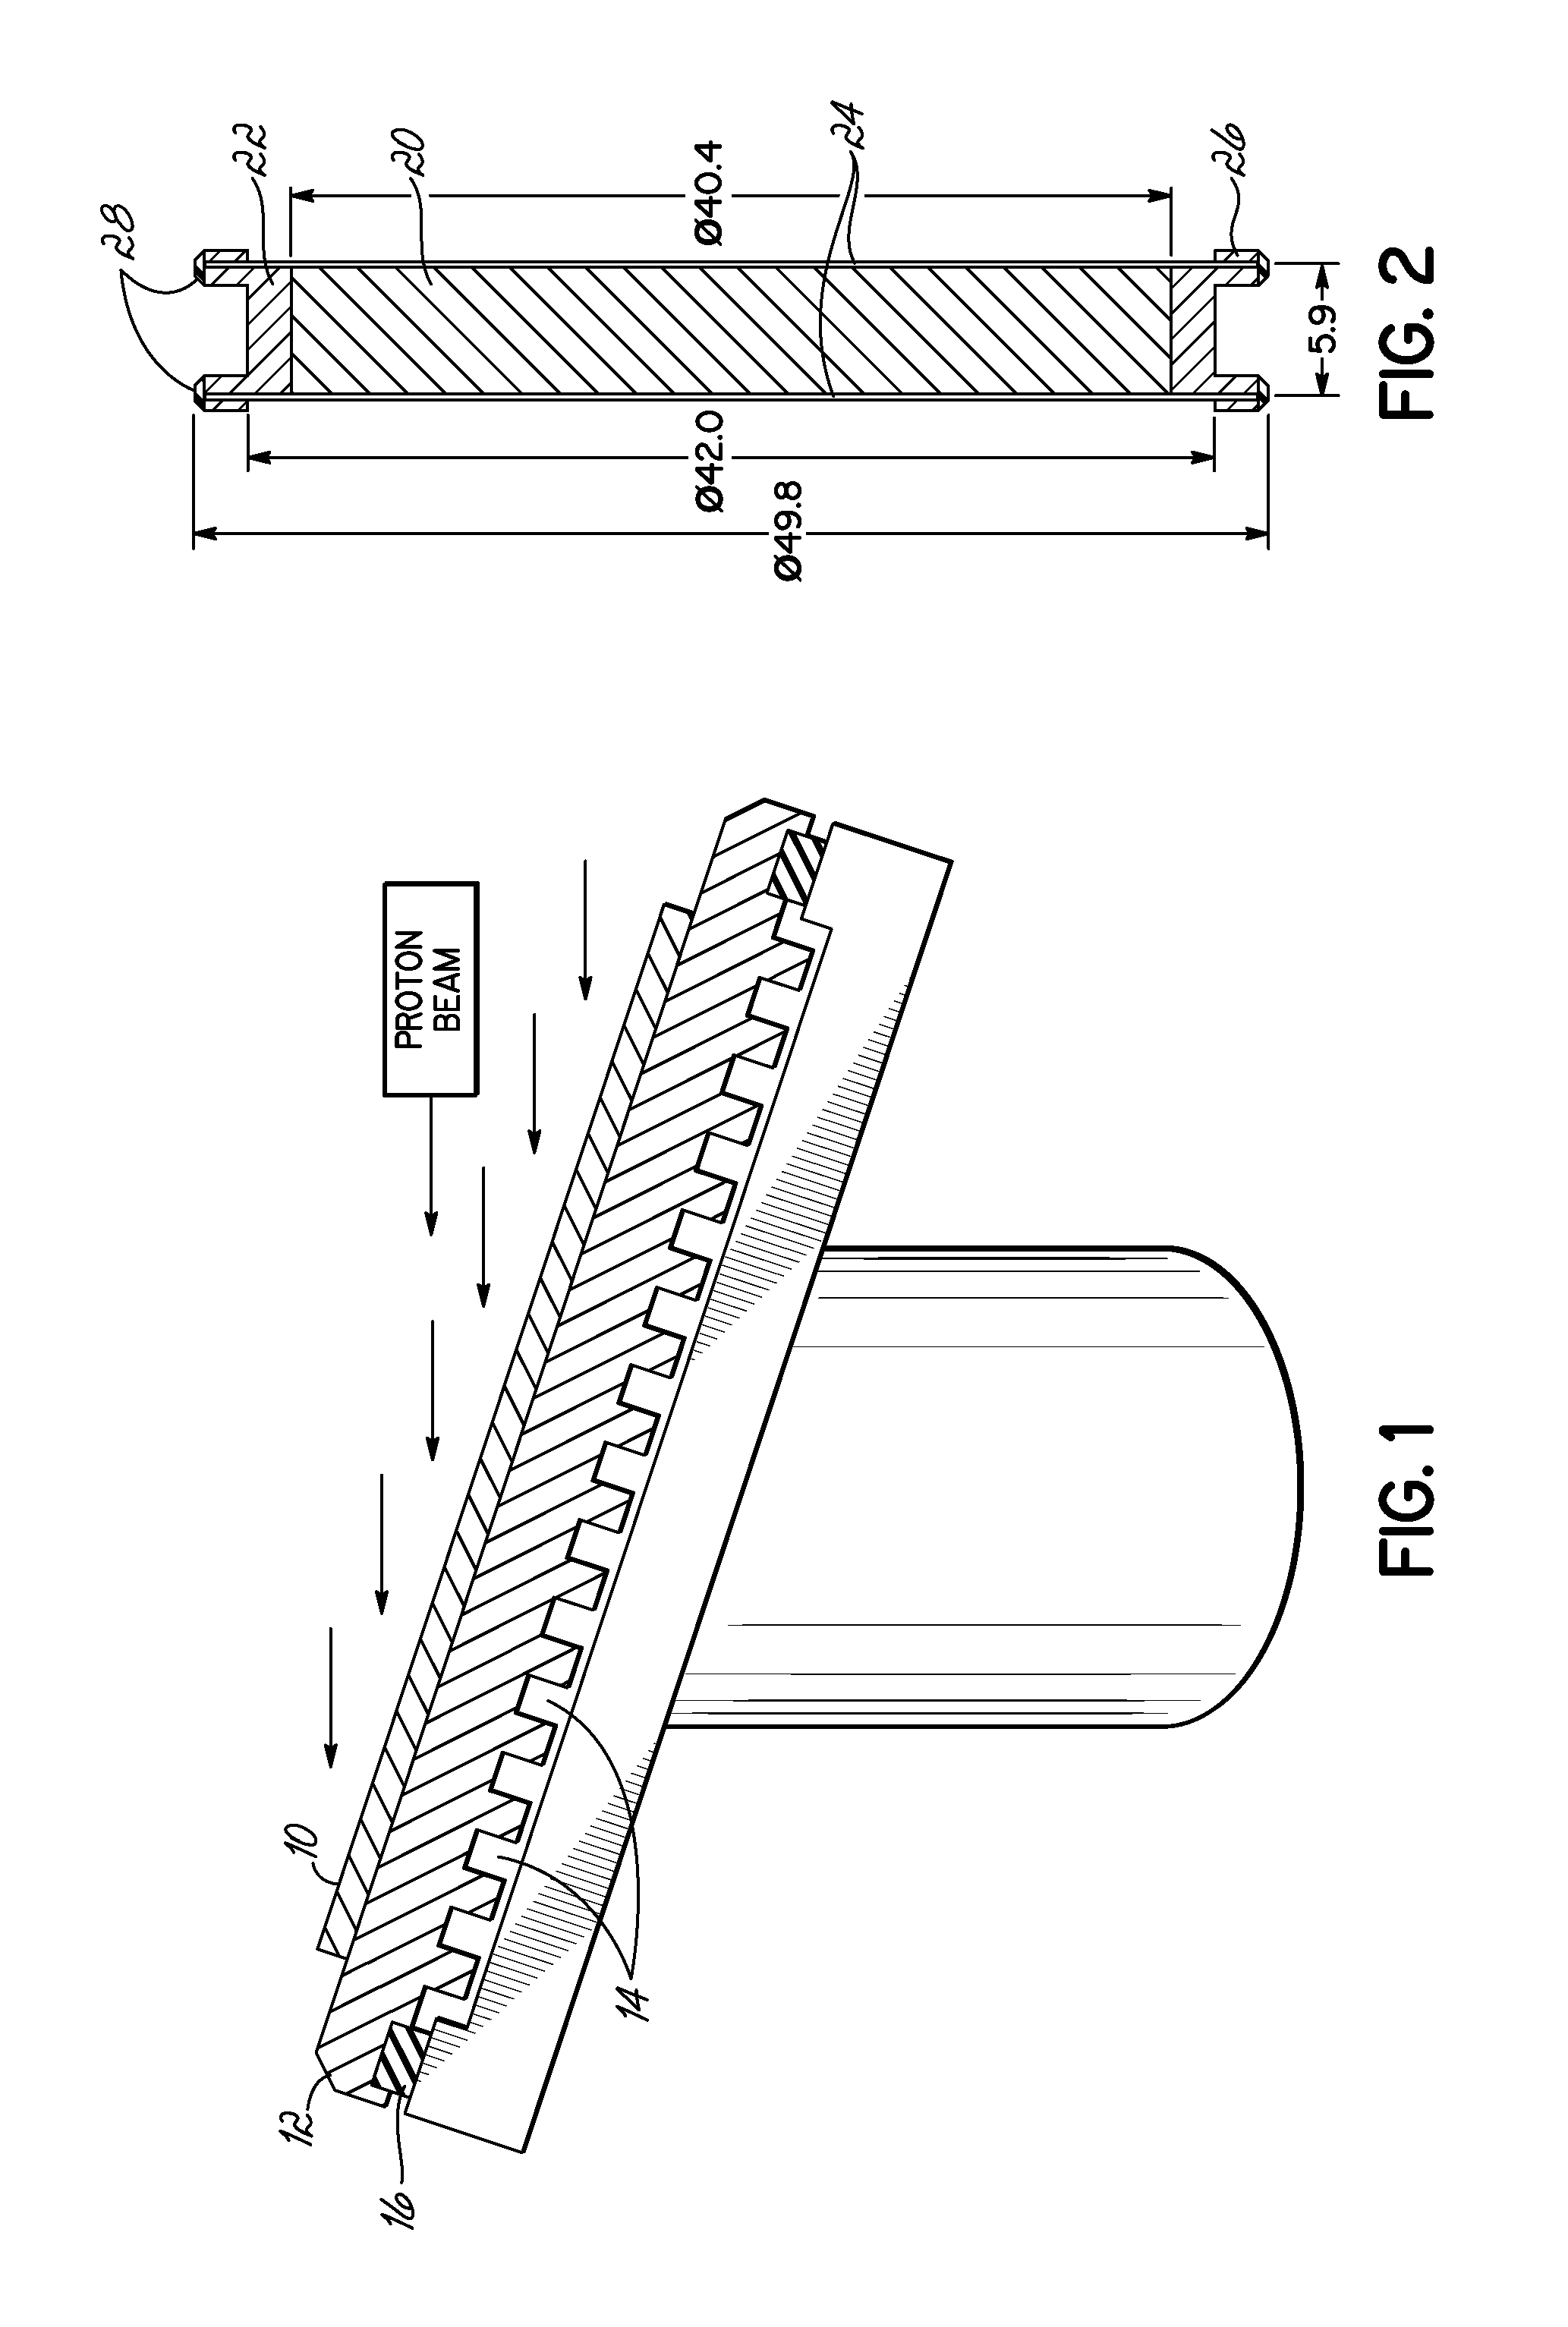 Targets and methods for target preparation for radionuclide production